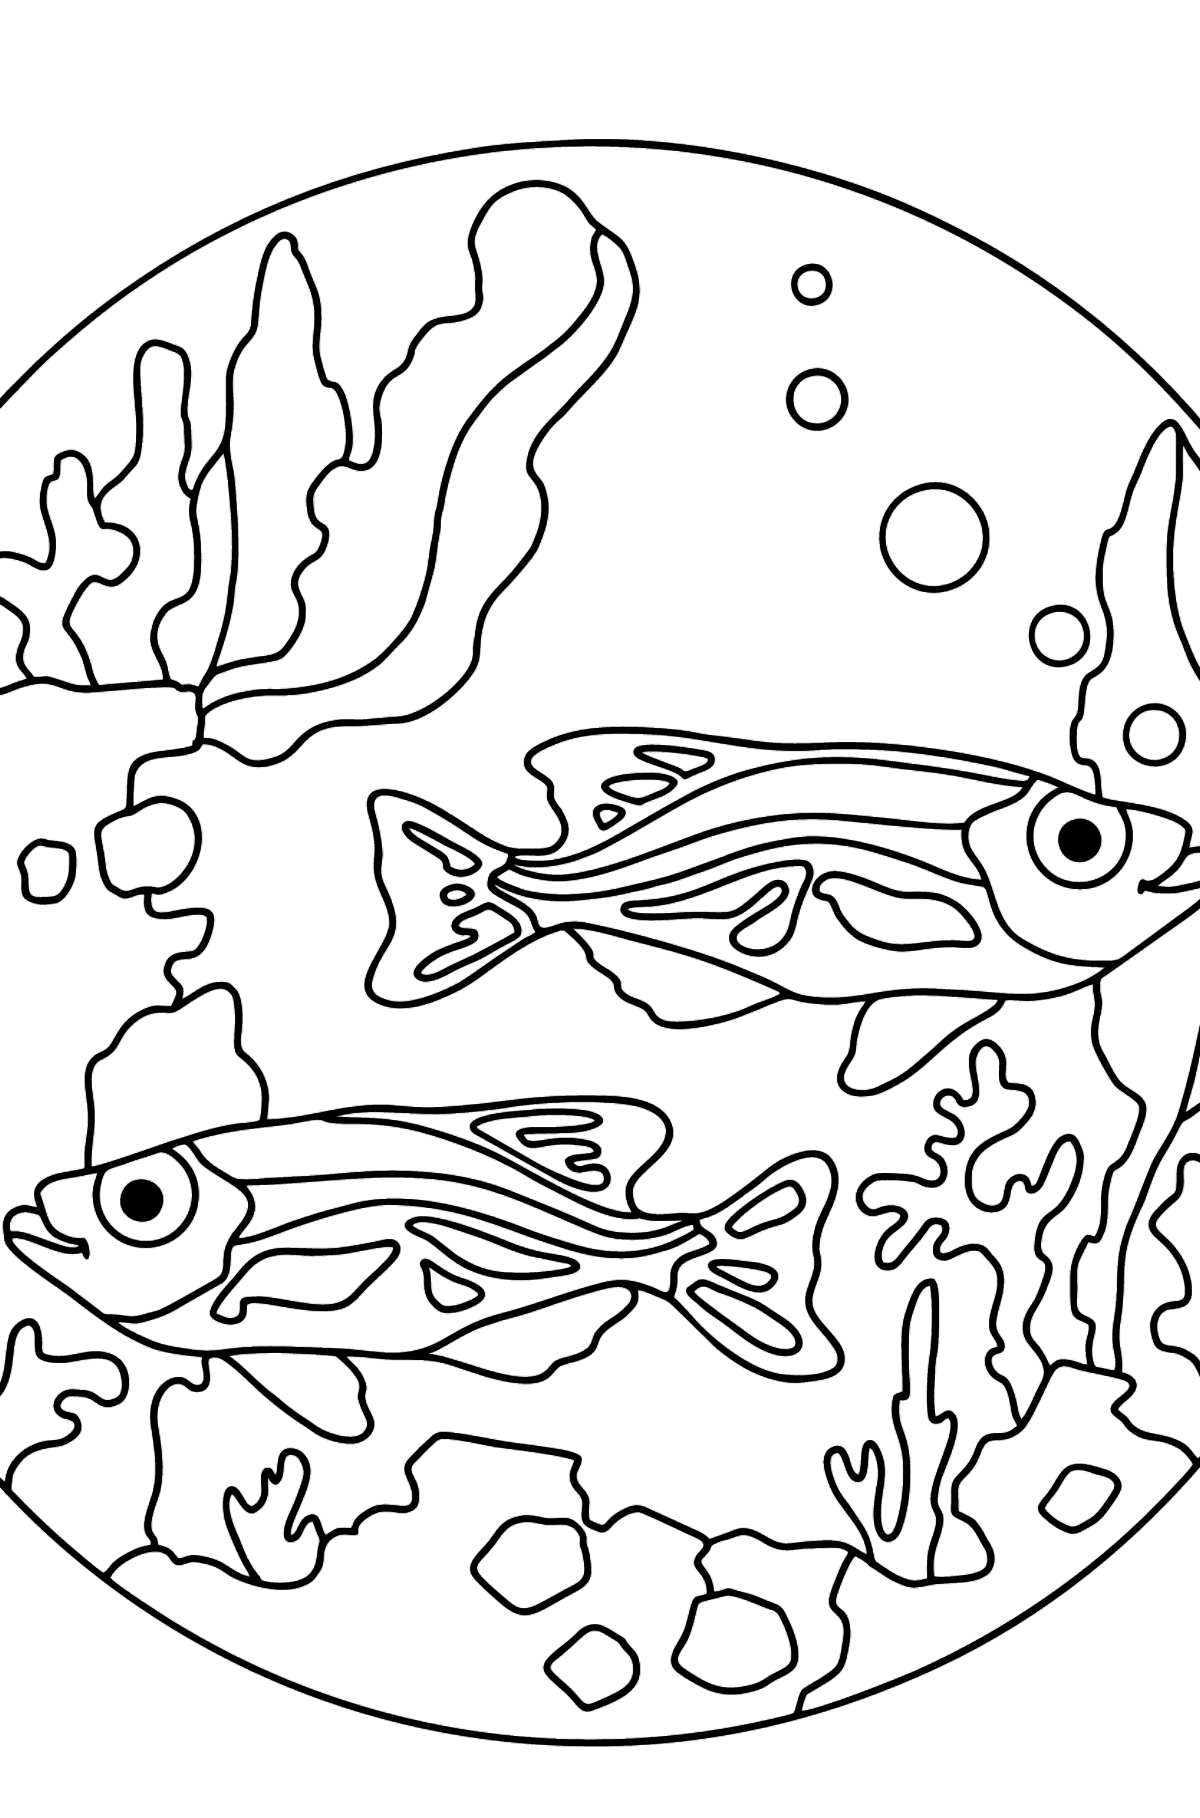 Coloring Page - Fish are Swimming Together Peacefully - Coloring Pages for Kids